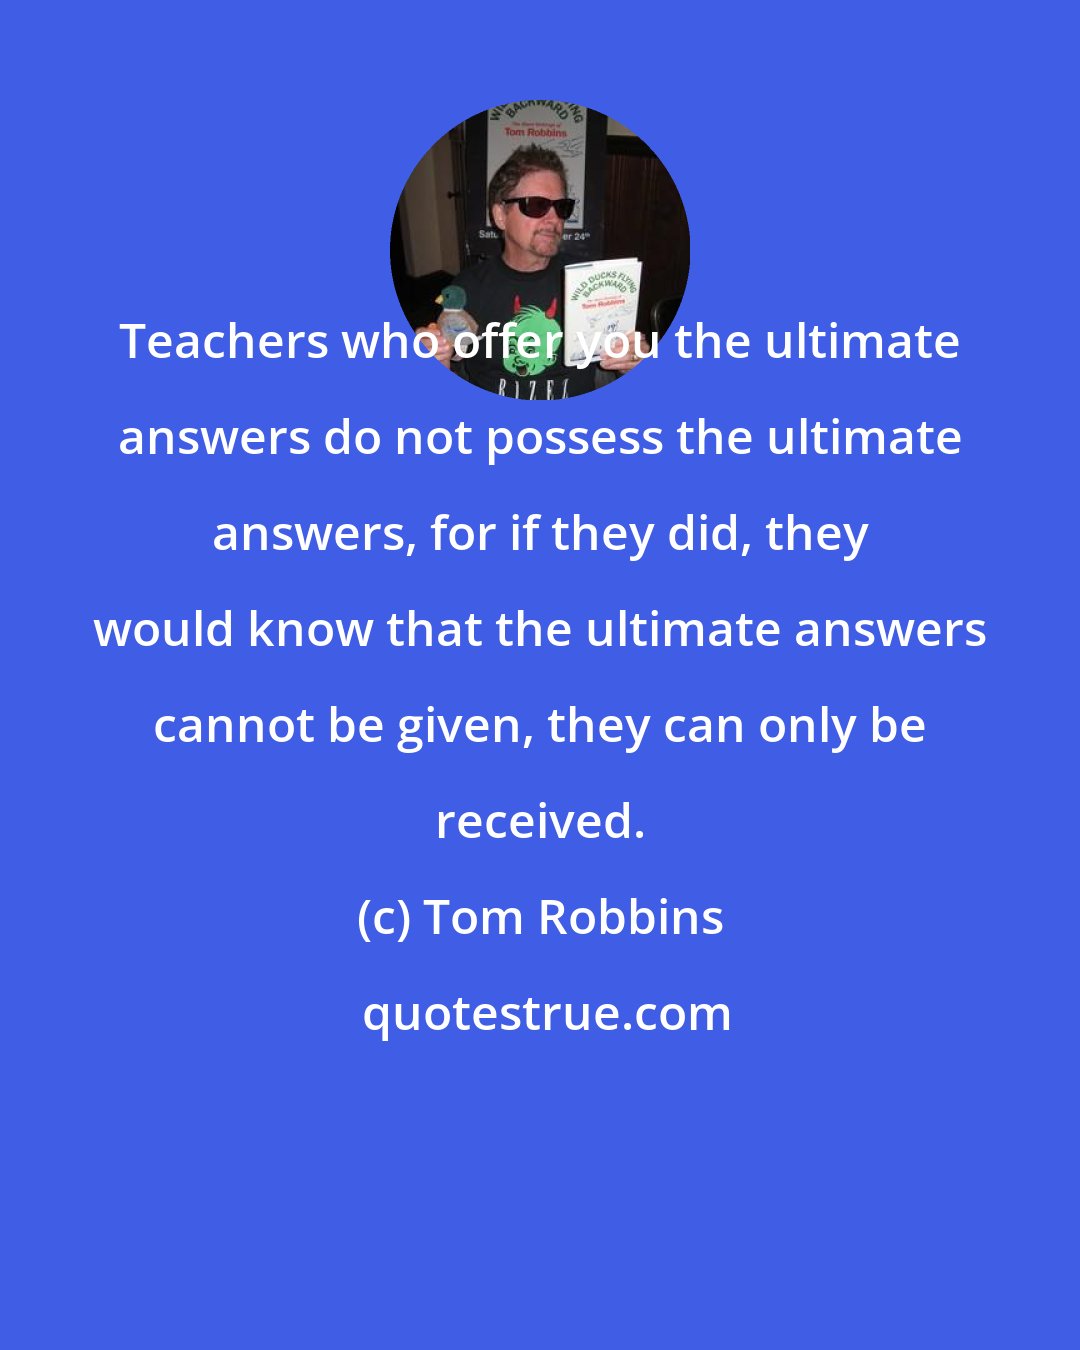 Tom Robbins: Teachers who offer you the ultimate answers do not possess the ultimate answers, for if they did, they would know that the ultimate answers cannot be given, they can only be received.